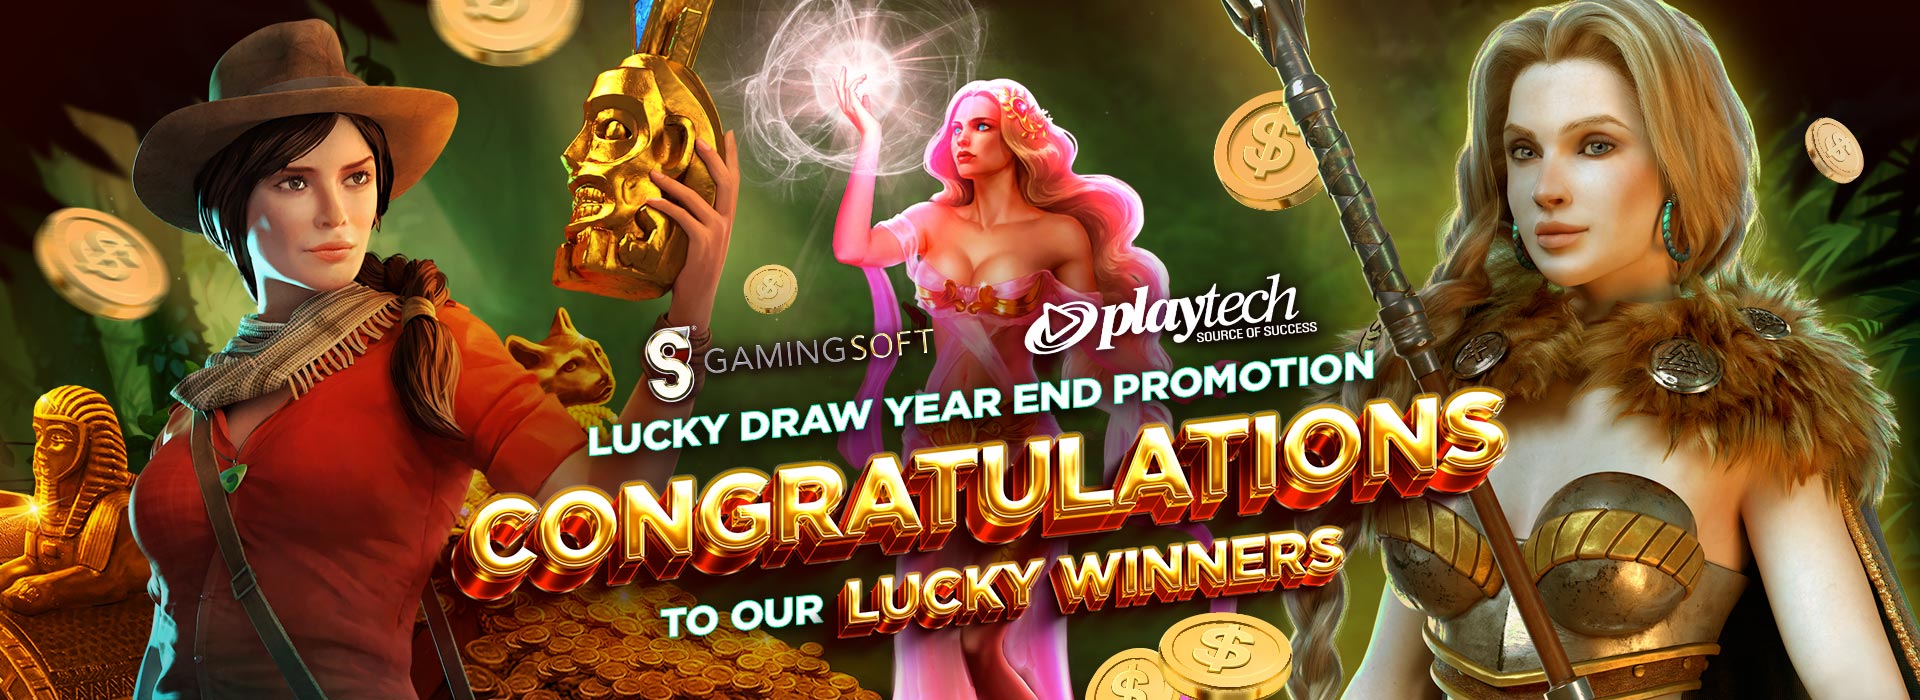 Congratulations! “GamingSoft - Playtech Lucky Draw Year End Promotion” Draw 2 Winner Announcement 